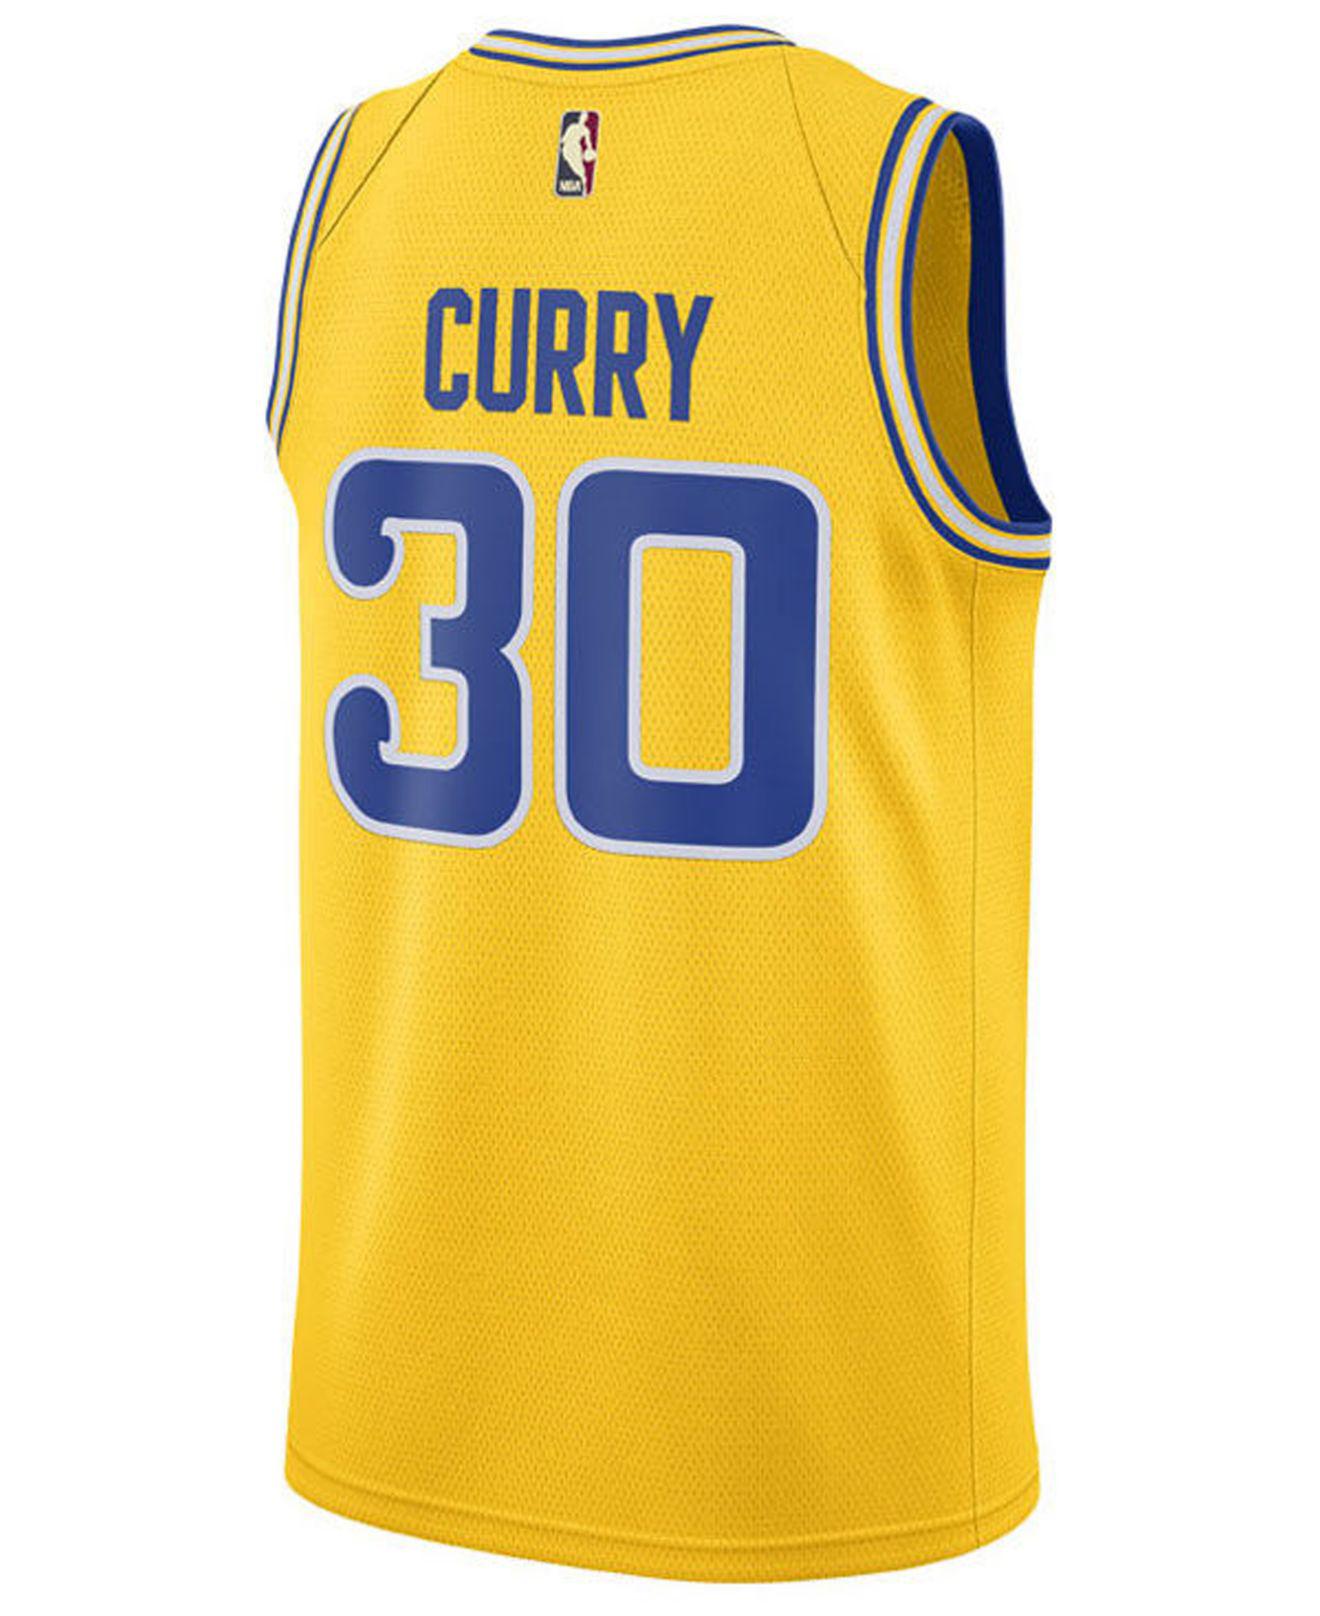 Lyst - Nike Stephen Curry Golden State Warriors Hardwood Classic ...